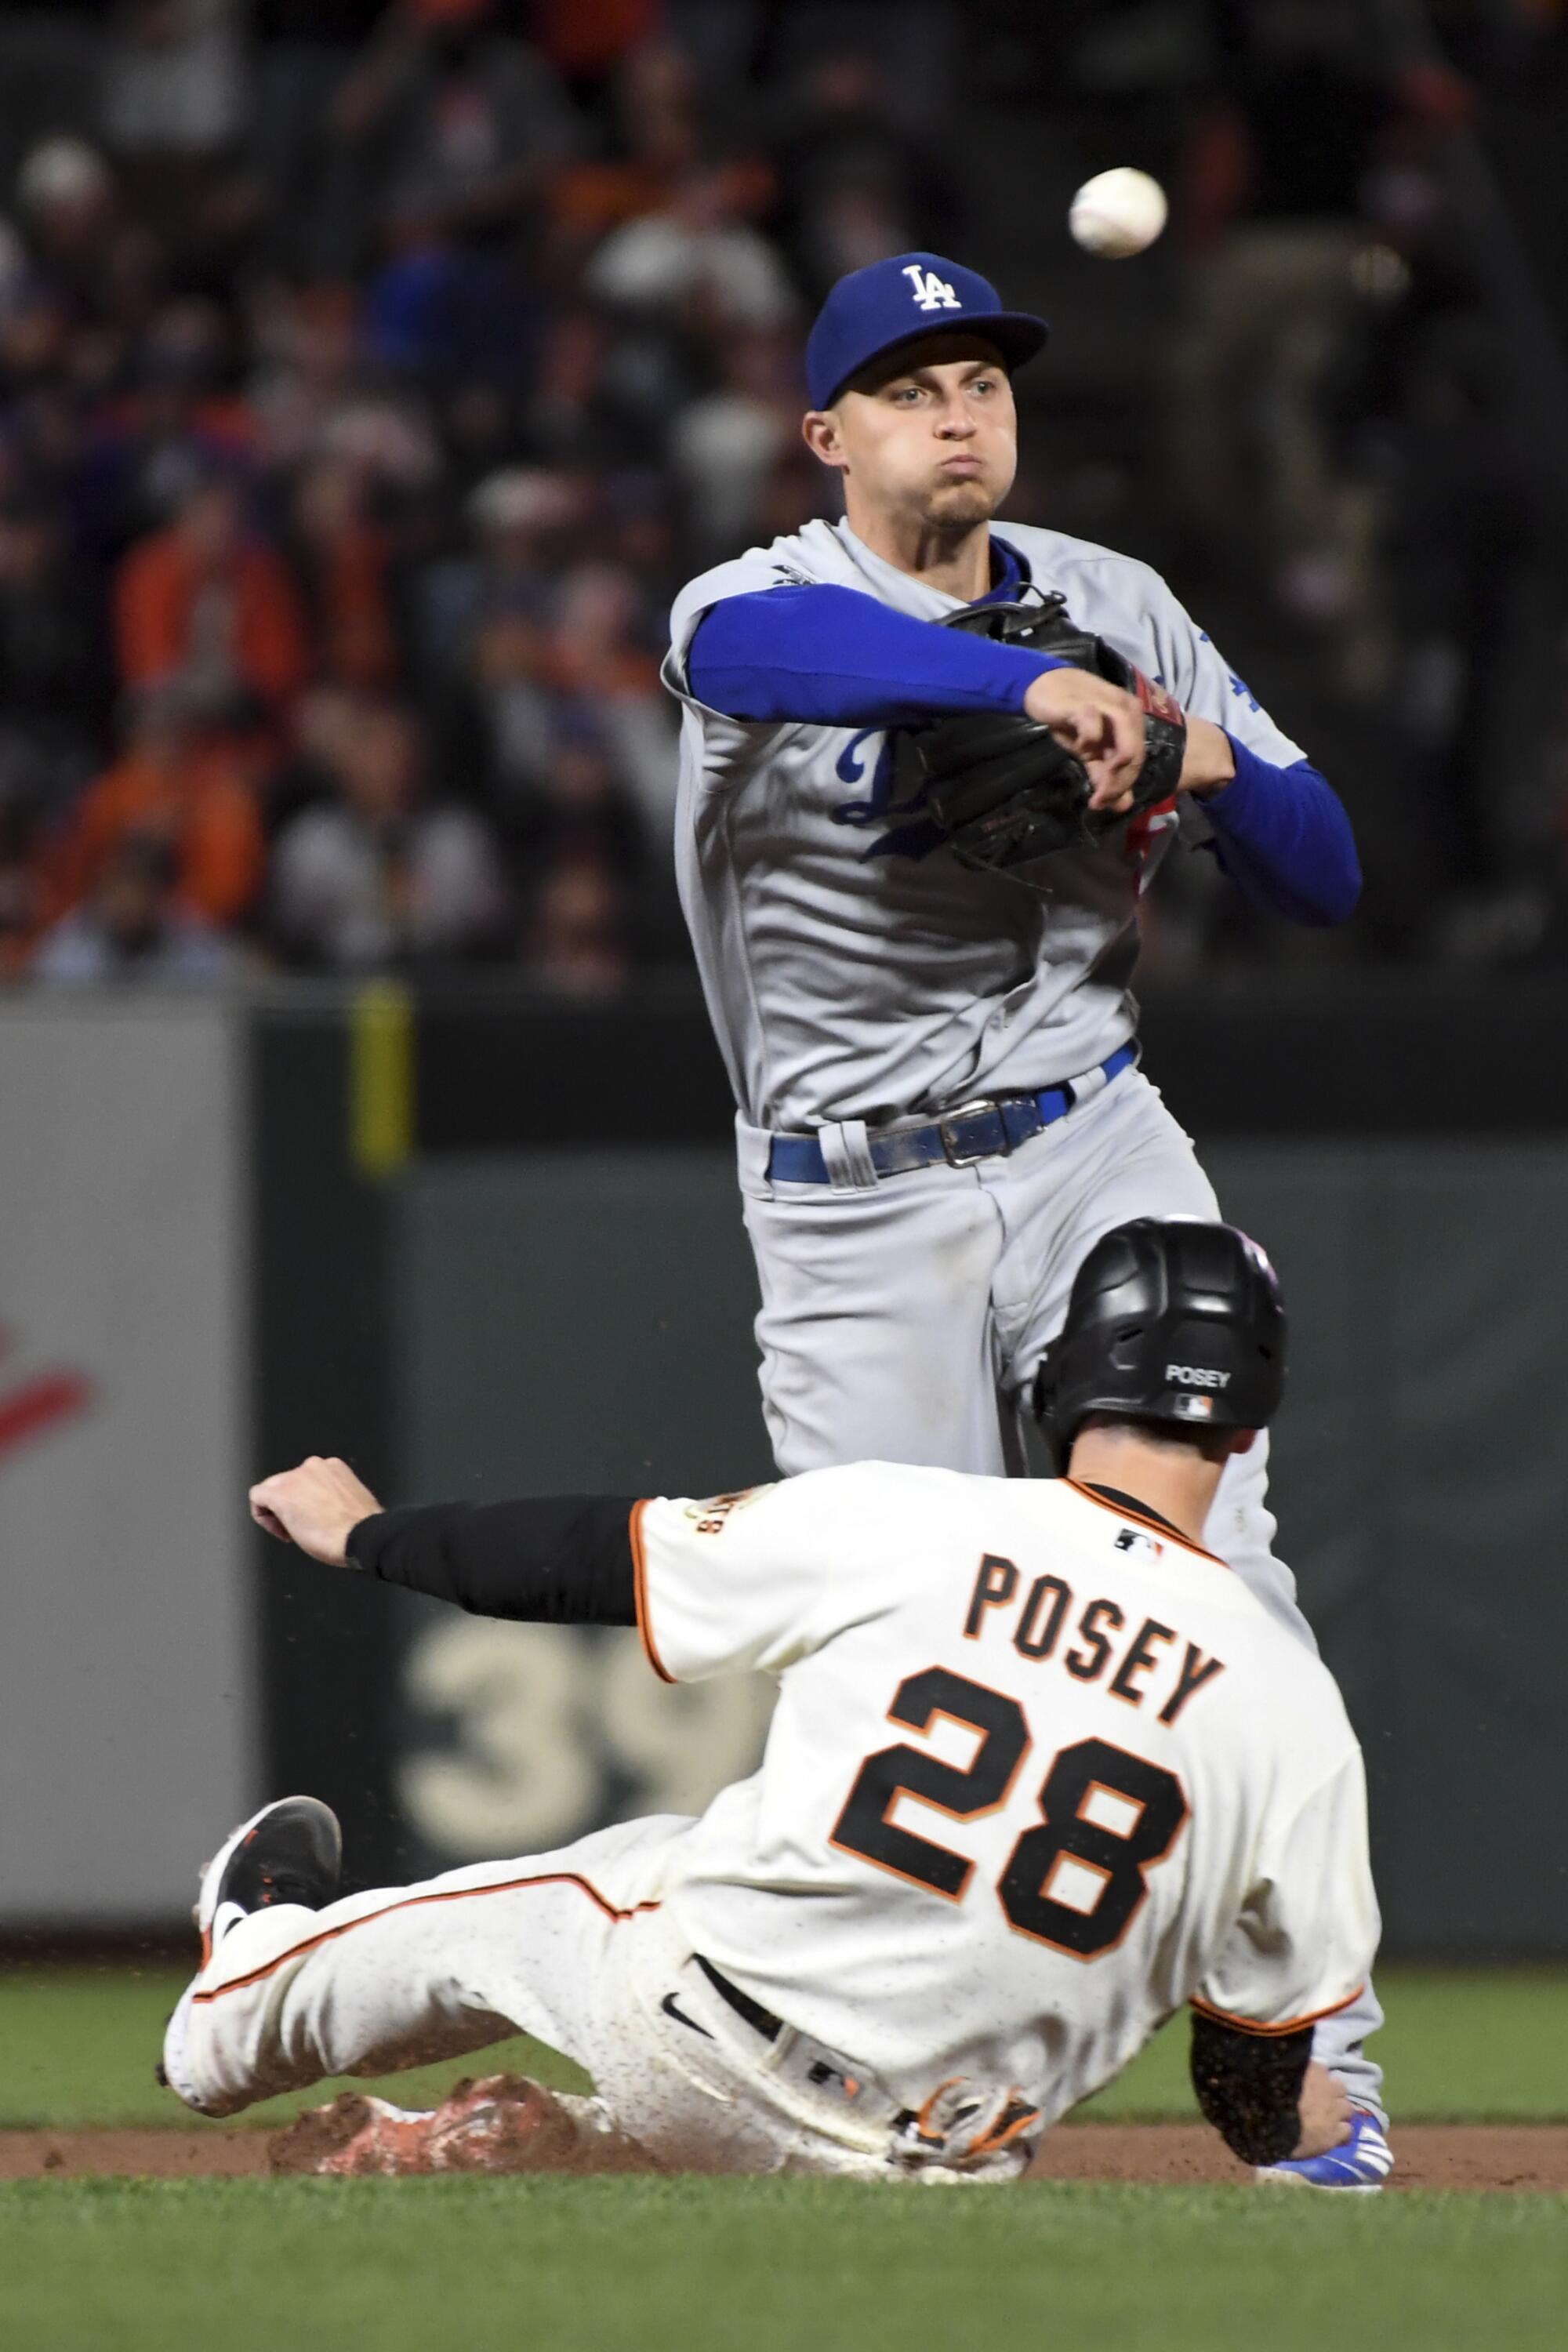 Dodgers shortstop Corey Seager, top, throws to first after forcing out Giants' Buster Posey